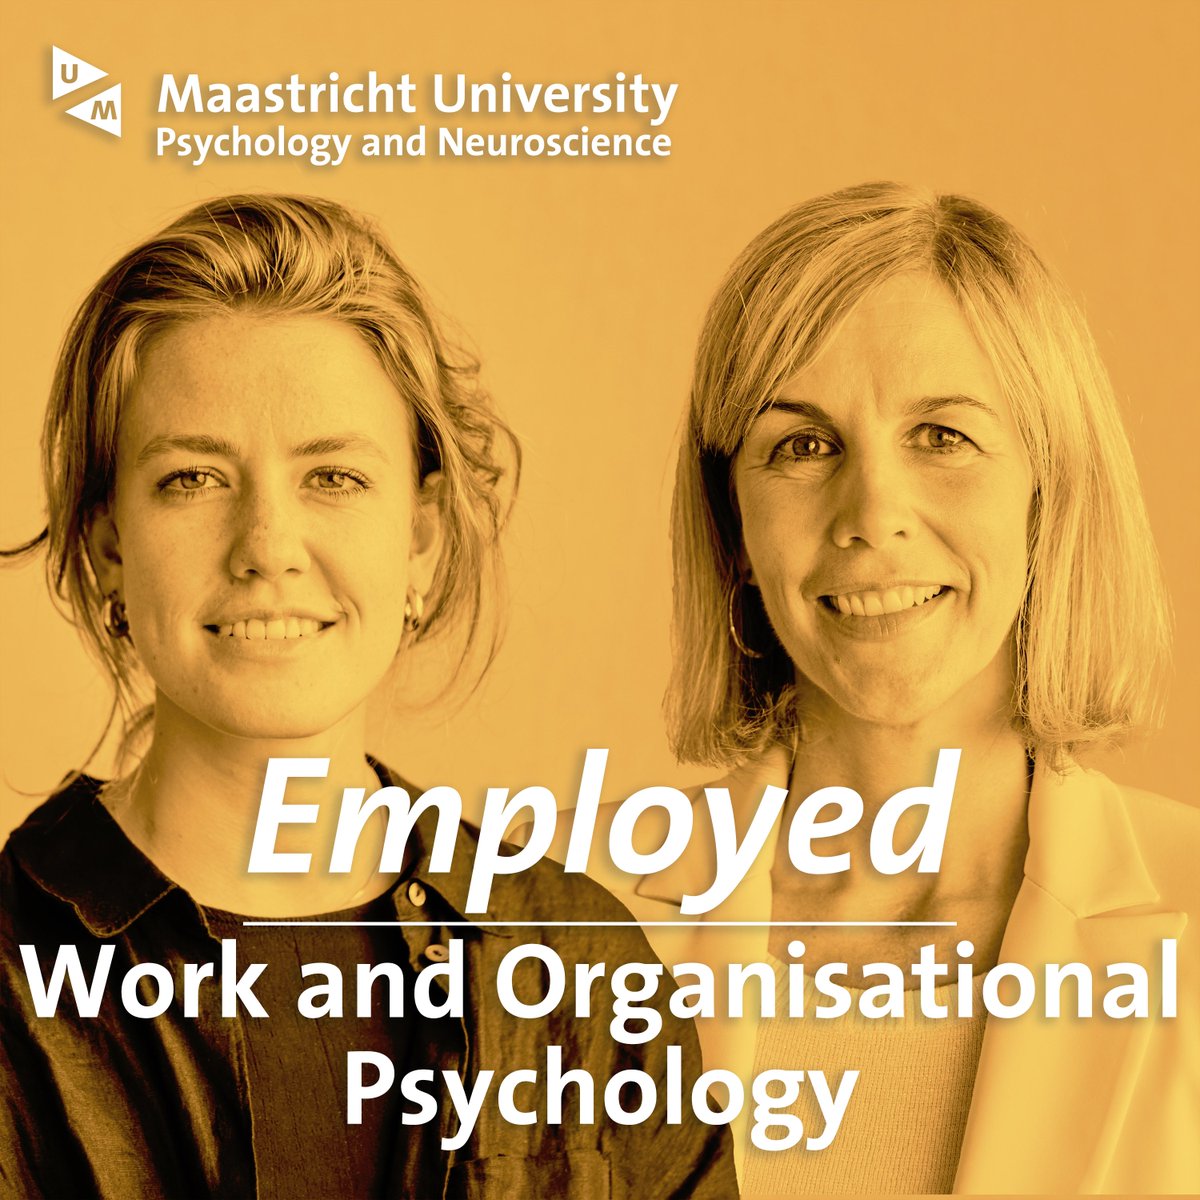 tr.ee/xHNJD1IUwG Welcome to Employed! Today's episode is about the master Psychology specialisation Work and Organisational Psychology!